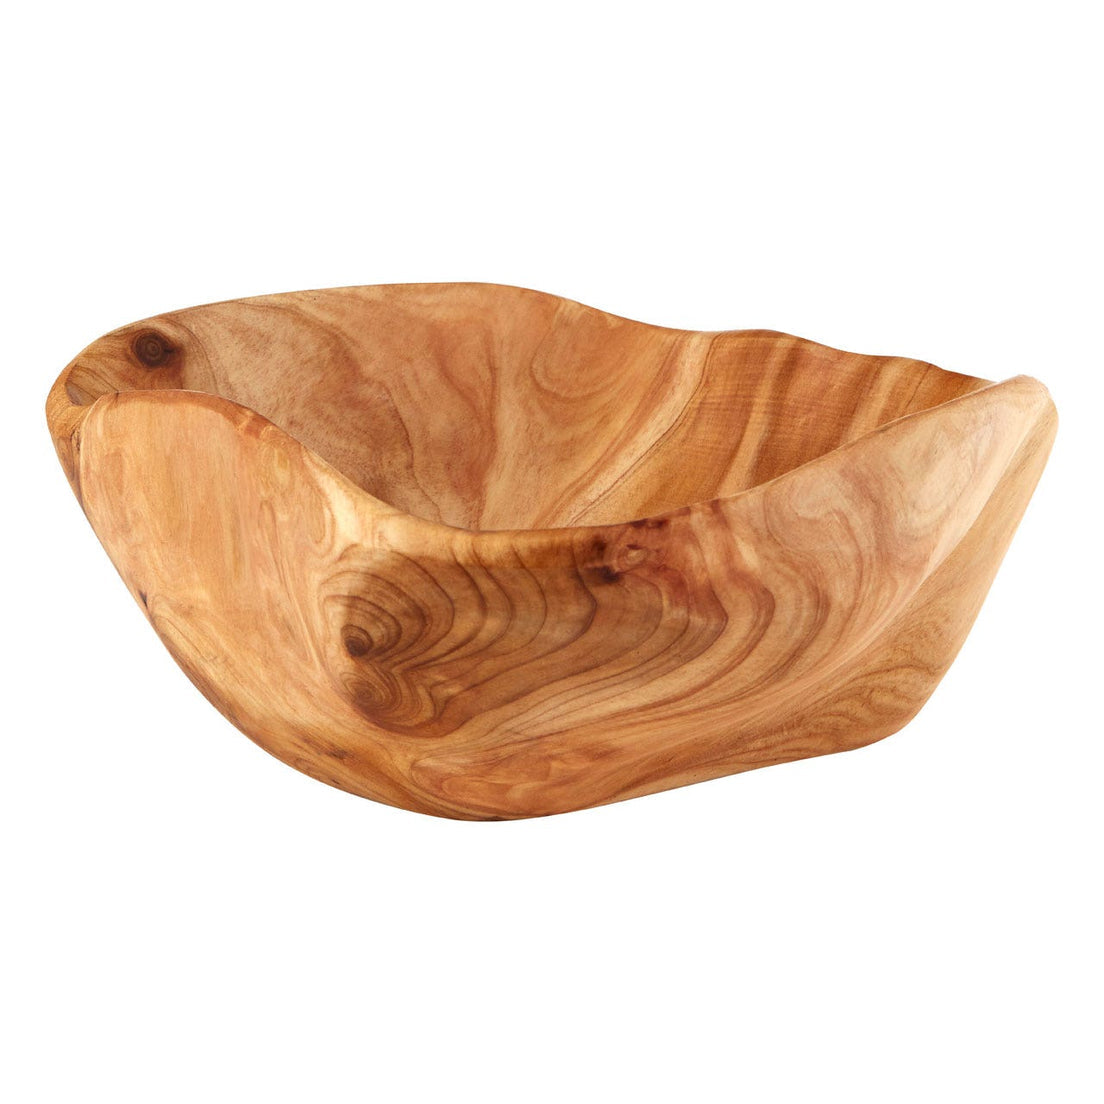 Natural cedar wood serving bowl perfect for fruits and salads